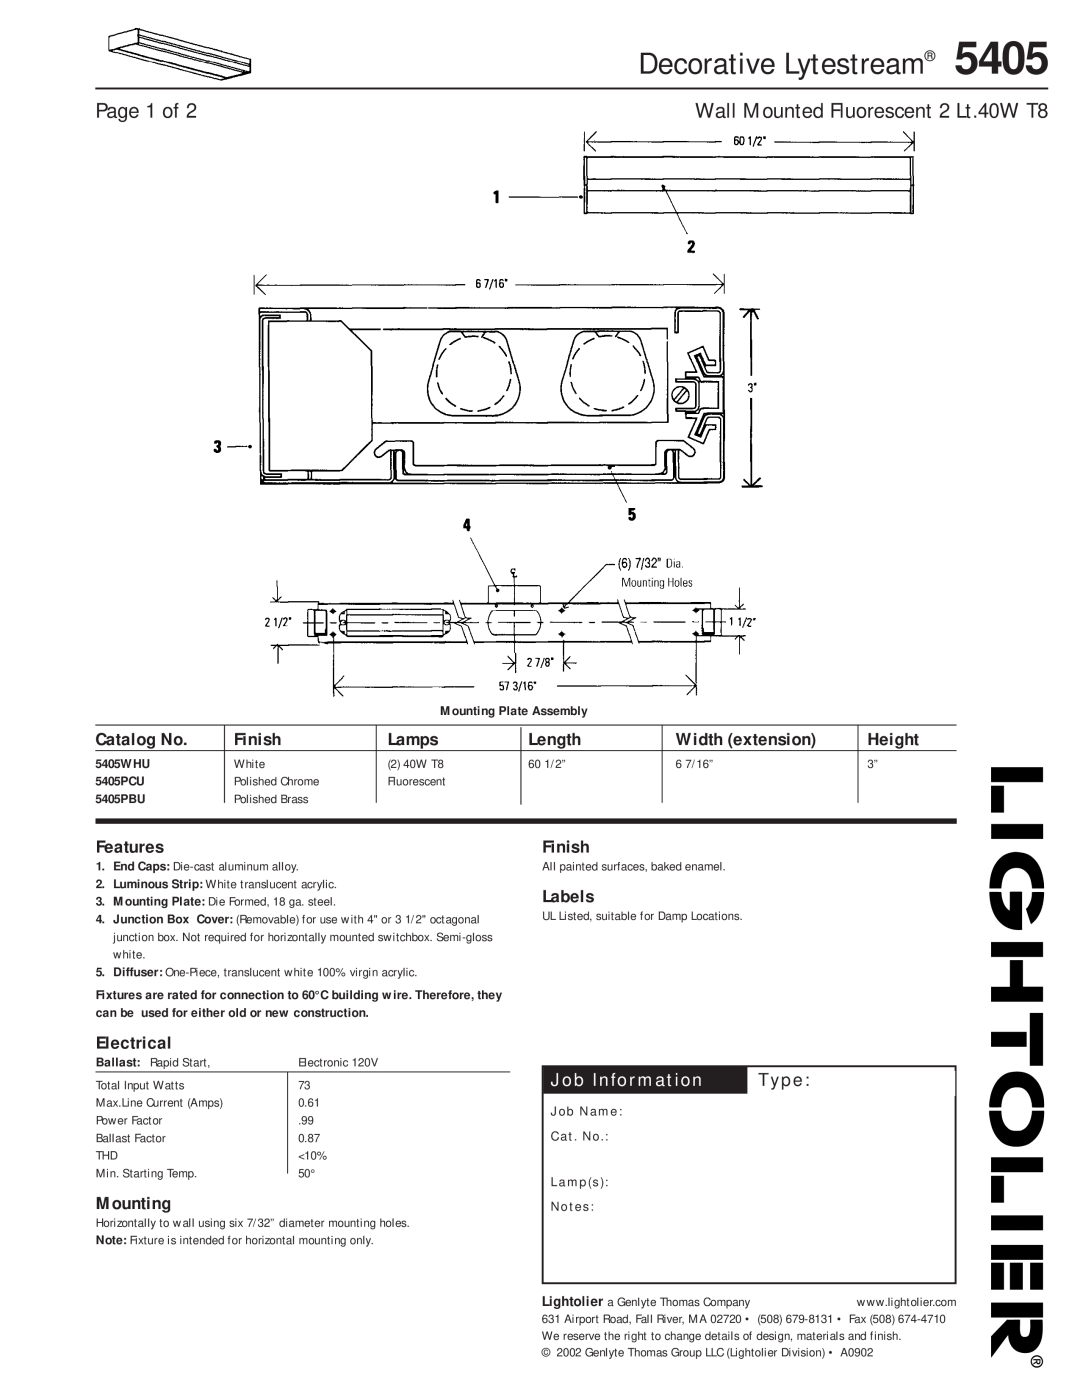 Lightolier 5405 manual Decorative Lytestream, Page 1 of, Catalog No, Finish, Lamps, Length, Width extension, Height 